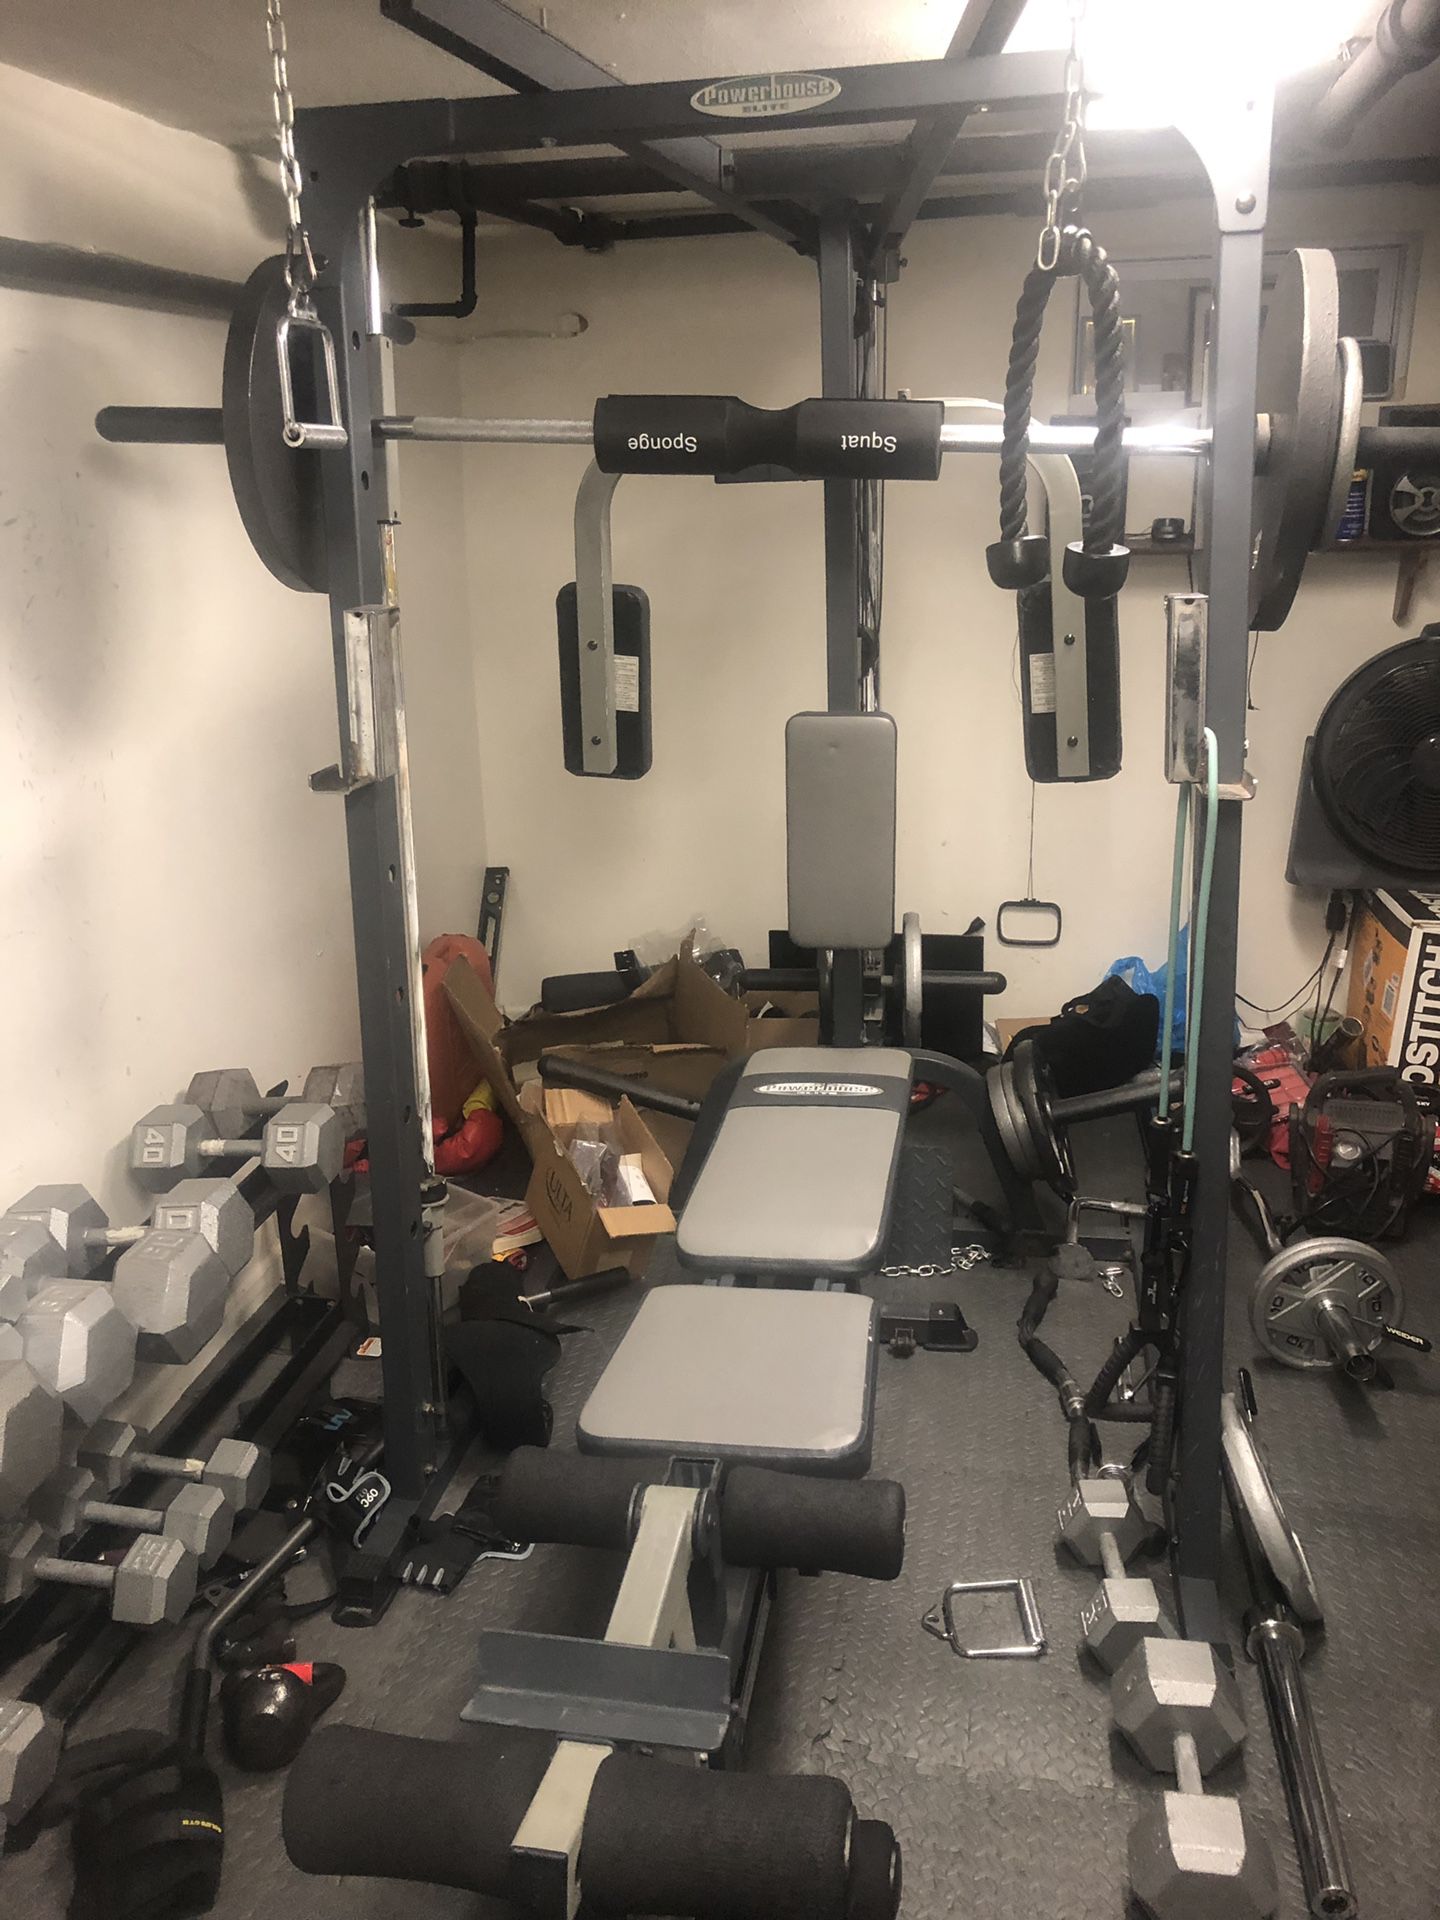 Smith multi purpose bench everything included except weights